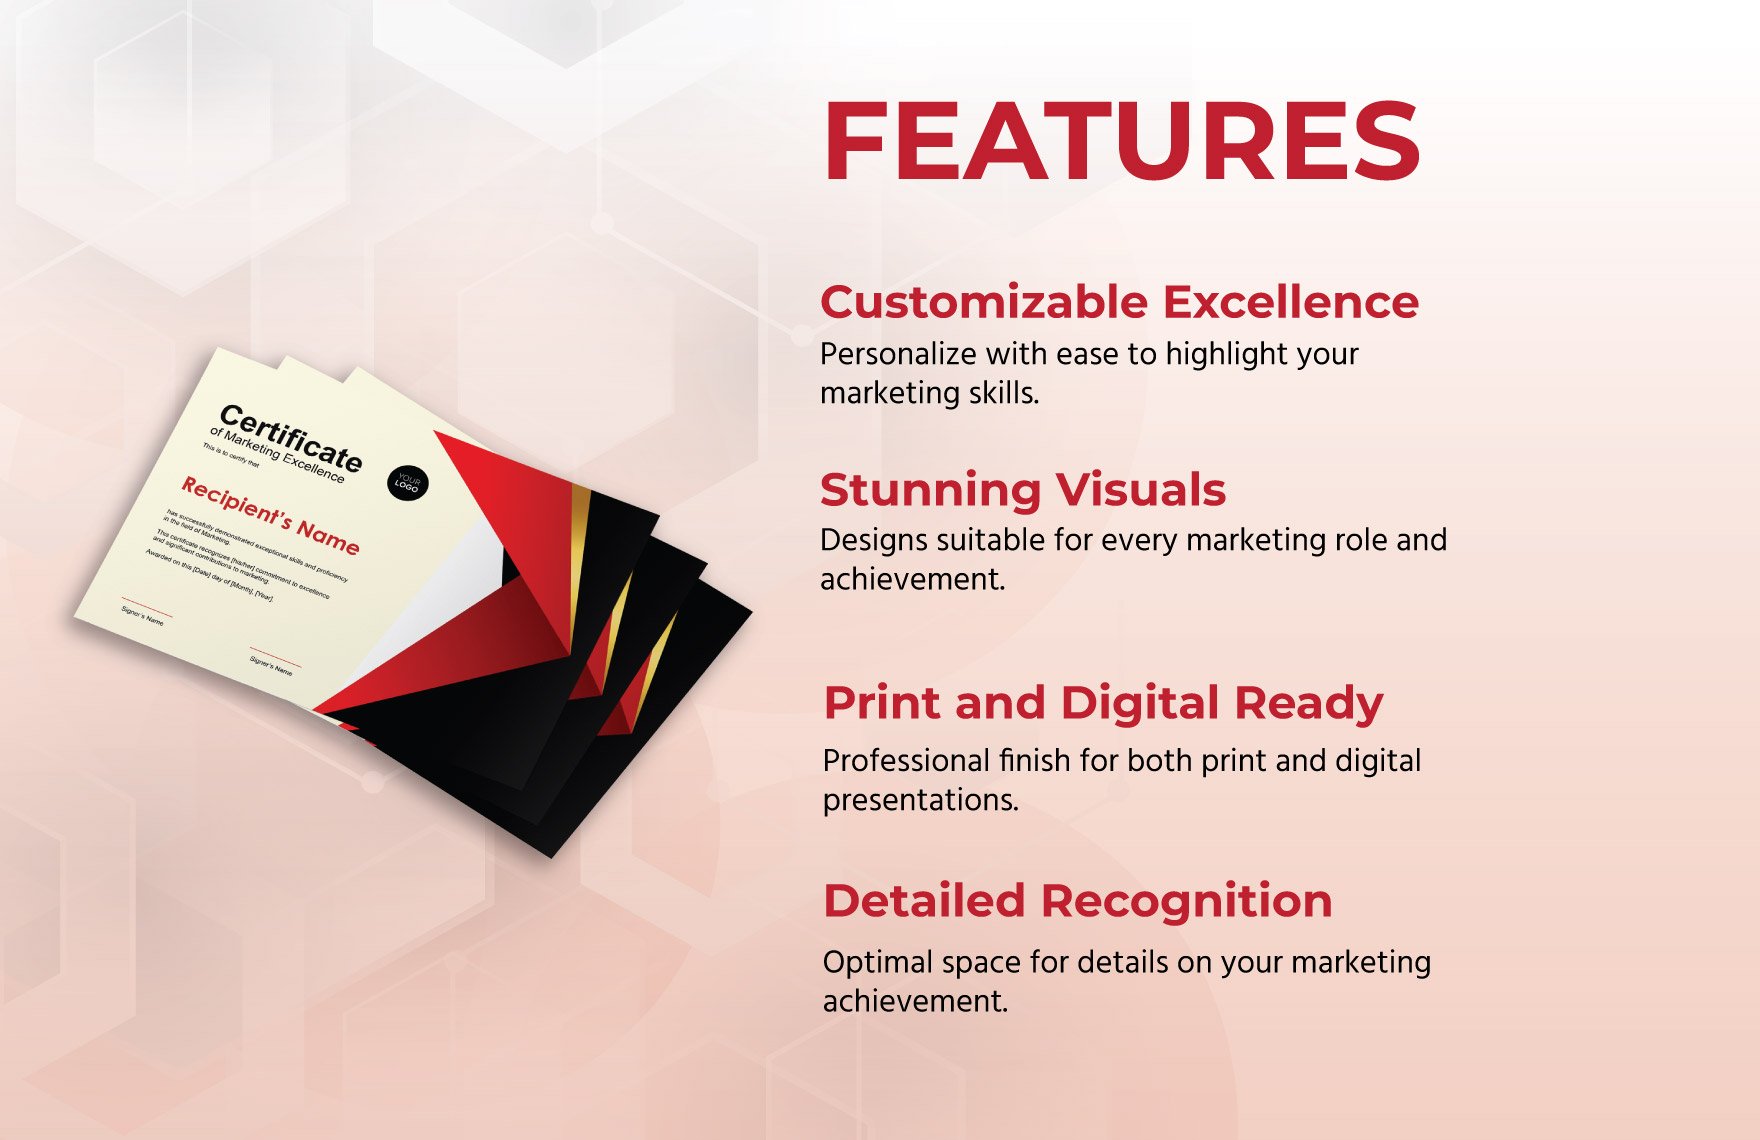 Marketing Excellence Certificate Template